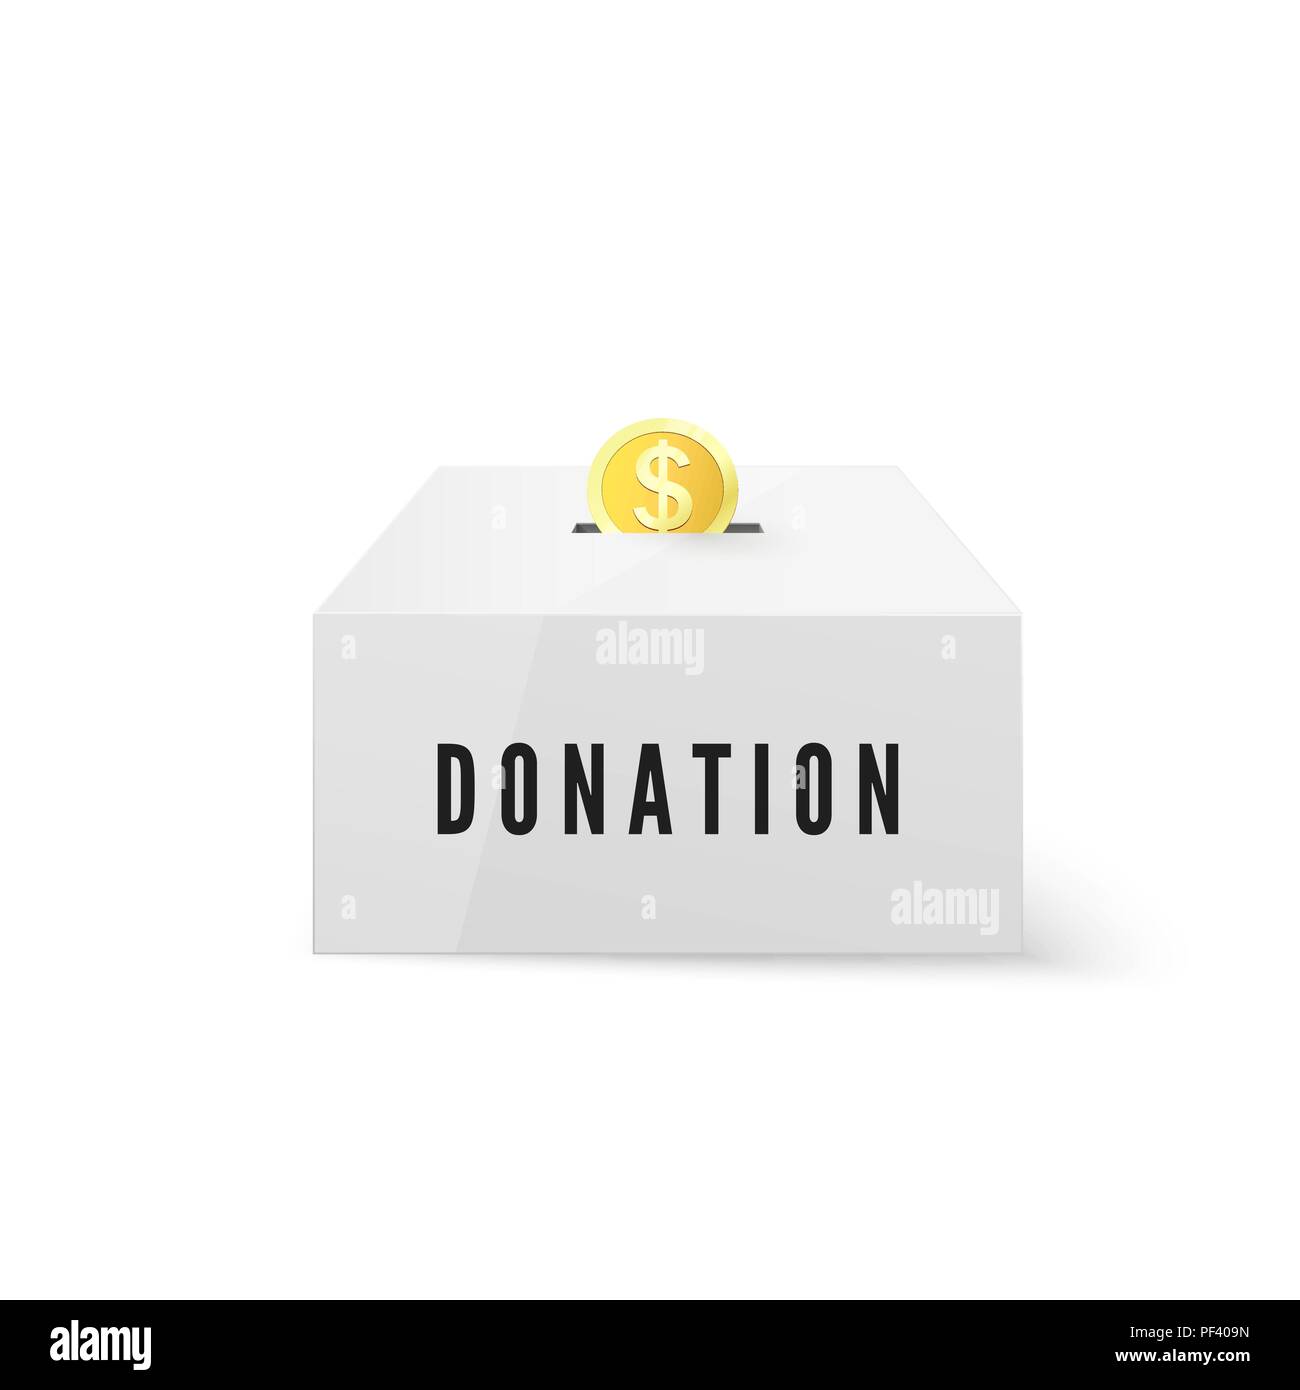 Donation and Charity. Donate money concept. Golden coin fund in money box. Vector illustration isolated on white background Stock Vector